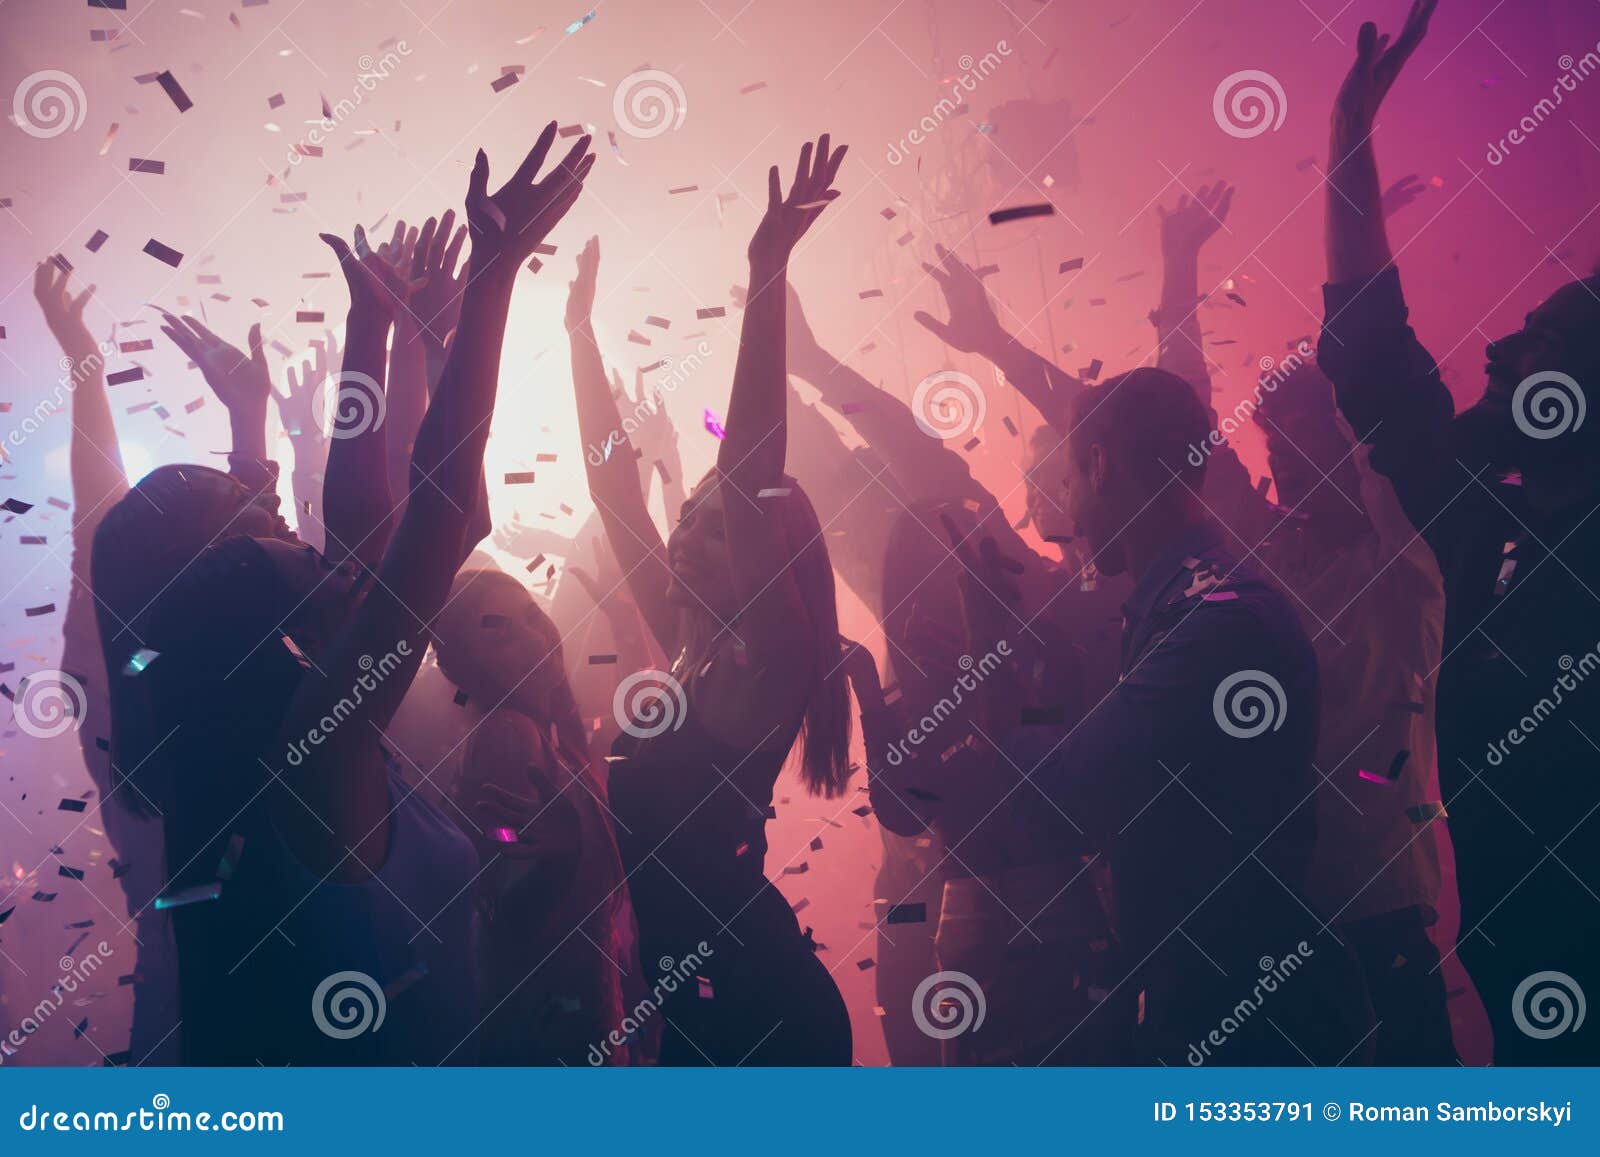 photo of many birthday event people dancing colorful lights confetti flying enjoy nightclub hands raised up wear shiny